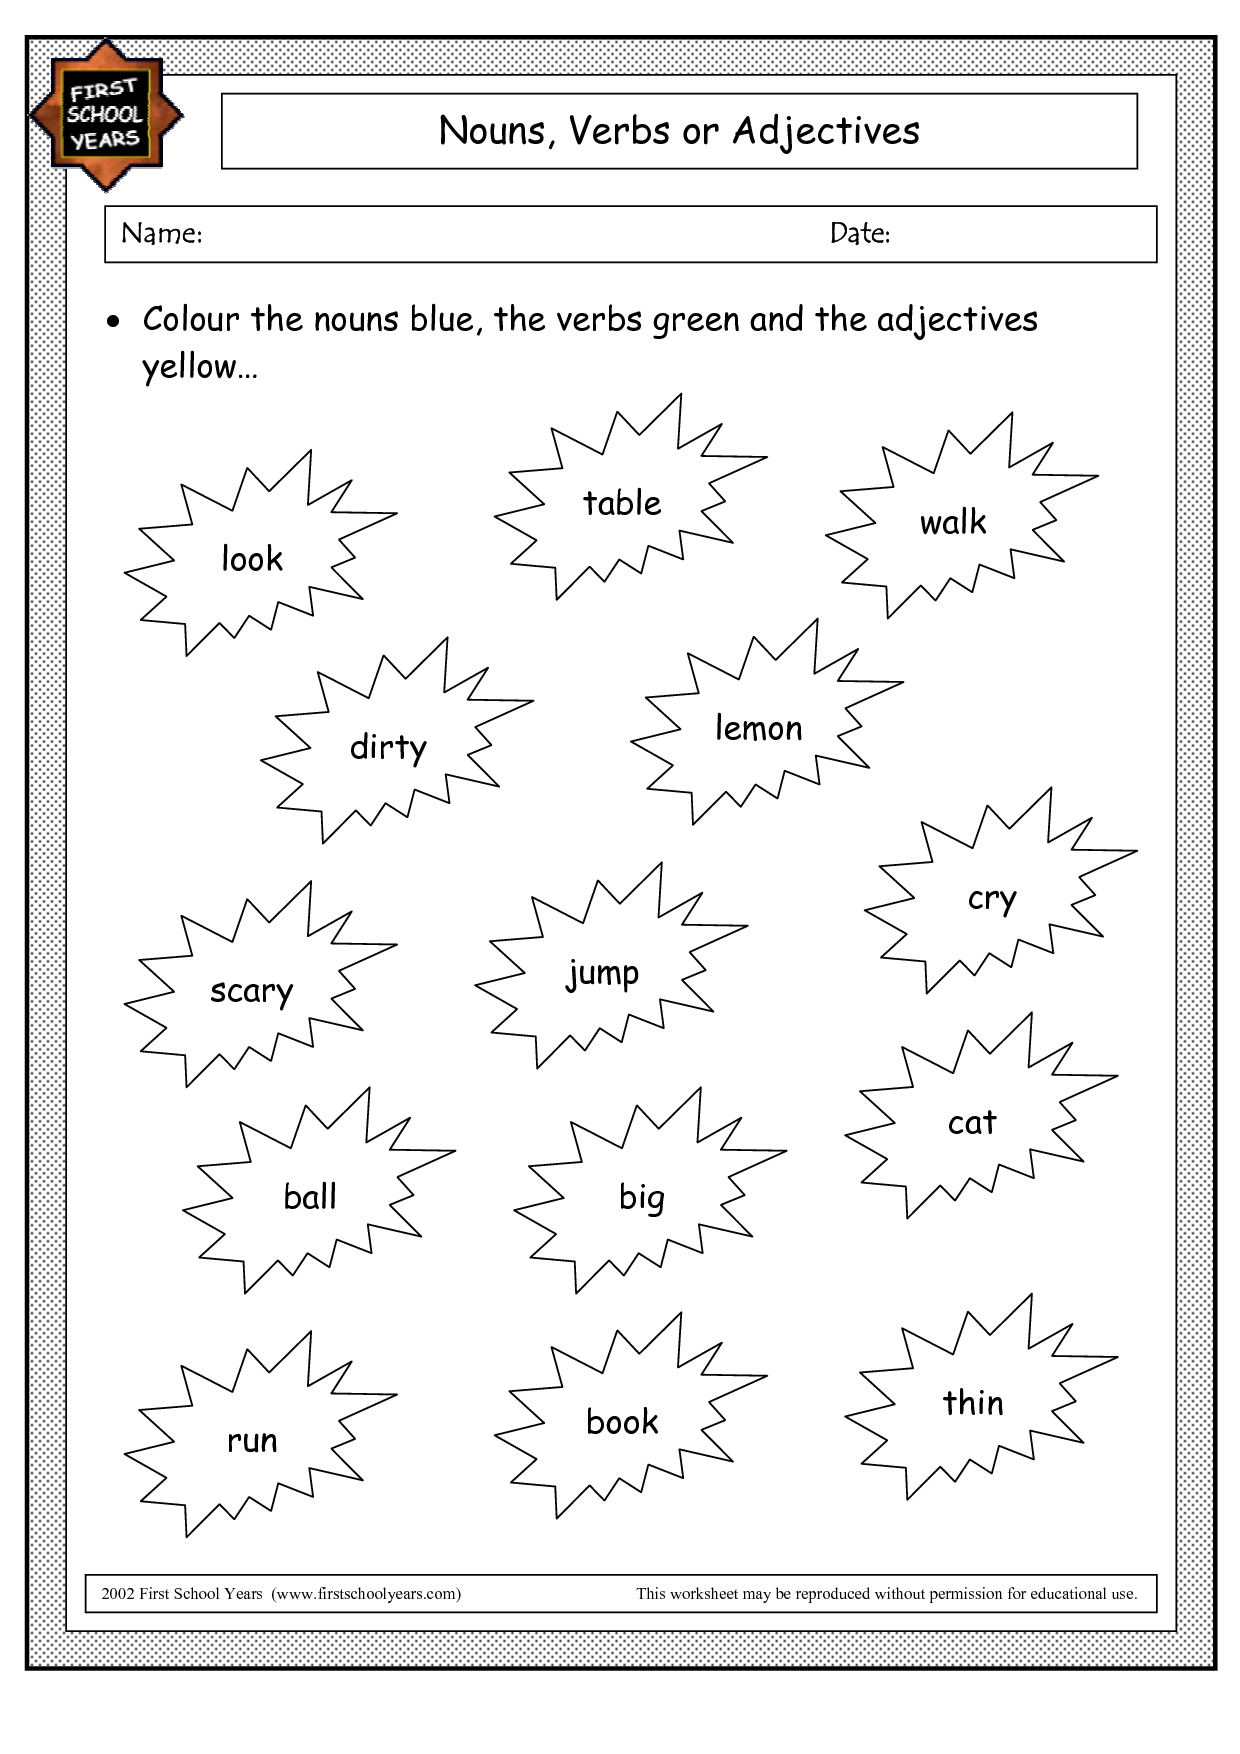 16 Best Images Of Verbs And Adverbs Worksheets Adverbs And Adjectives Printable Worksheets